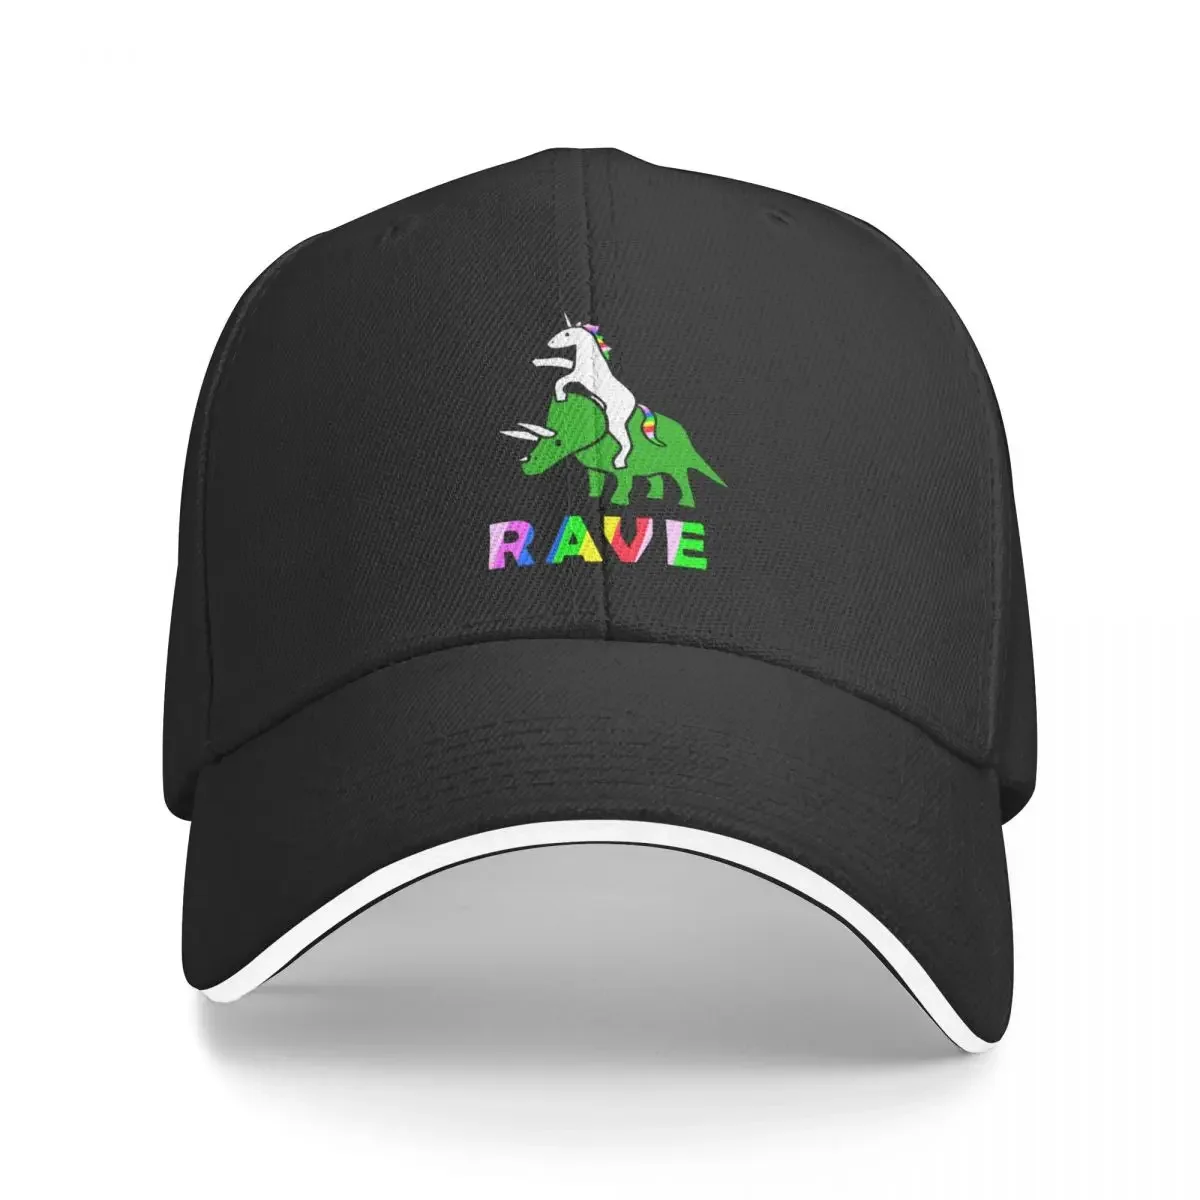 

To The Rave! (Unicorn Riding Triceratops) Baseball Cap Beach Outing Rugby Men's Women's